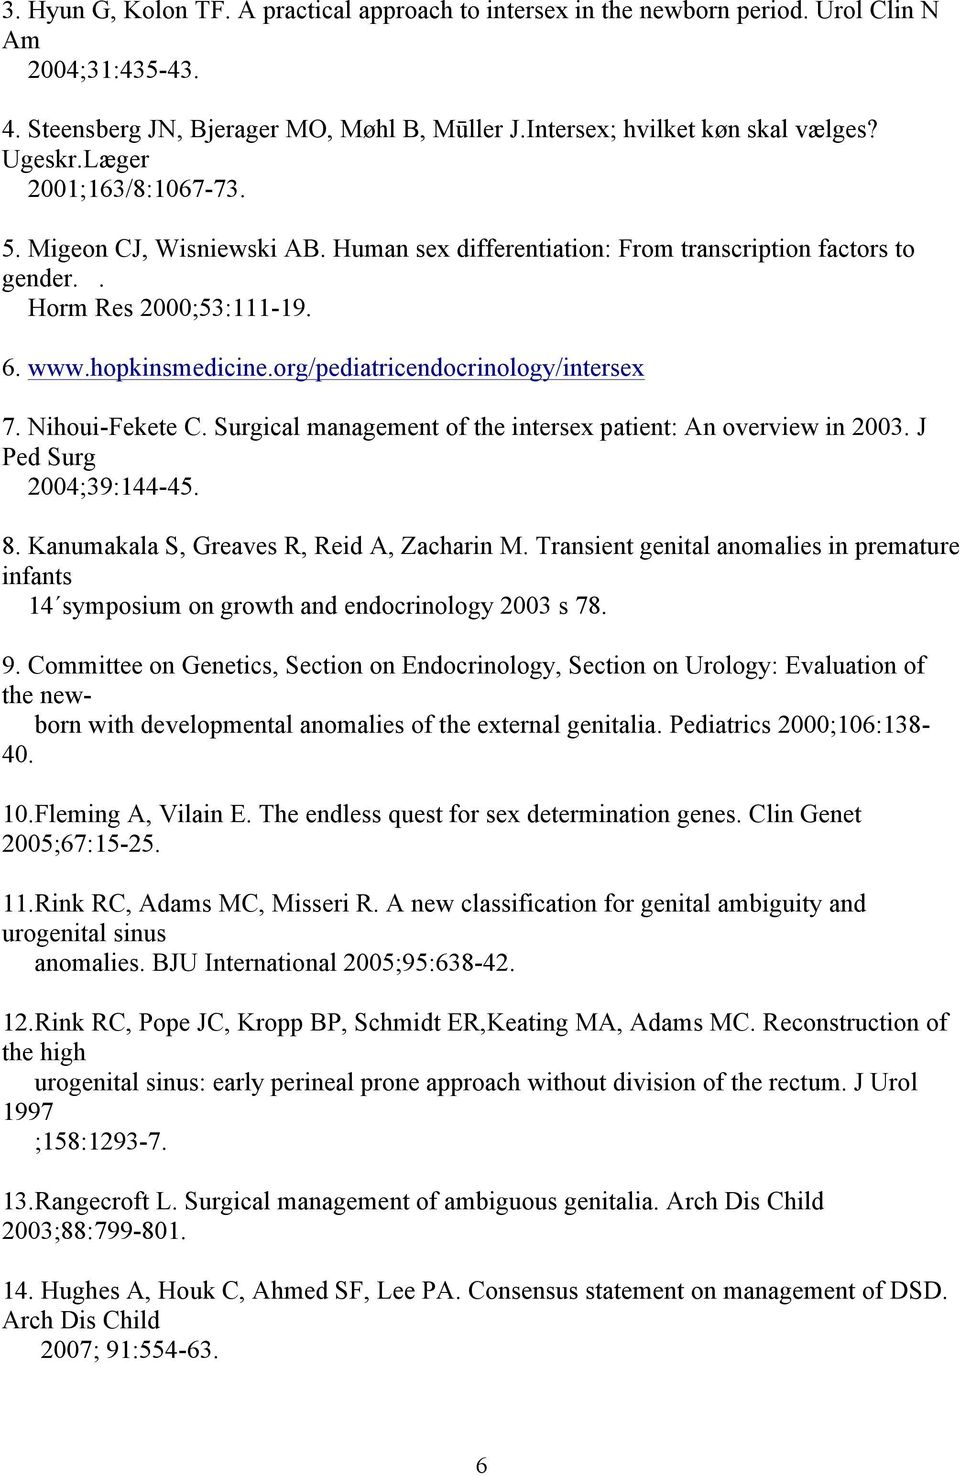 org/pediatricendocrinology/intersex 7. Nihoui-Fekete C. Surgical management of the intersex patient: An overview in 2003. J Ped Surg 2004;39:144-45. 8. Kanumakala S, Greaves R, Reid A, Zacharin M.